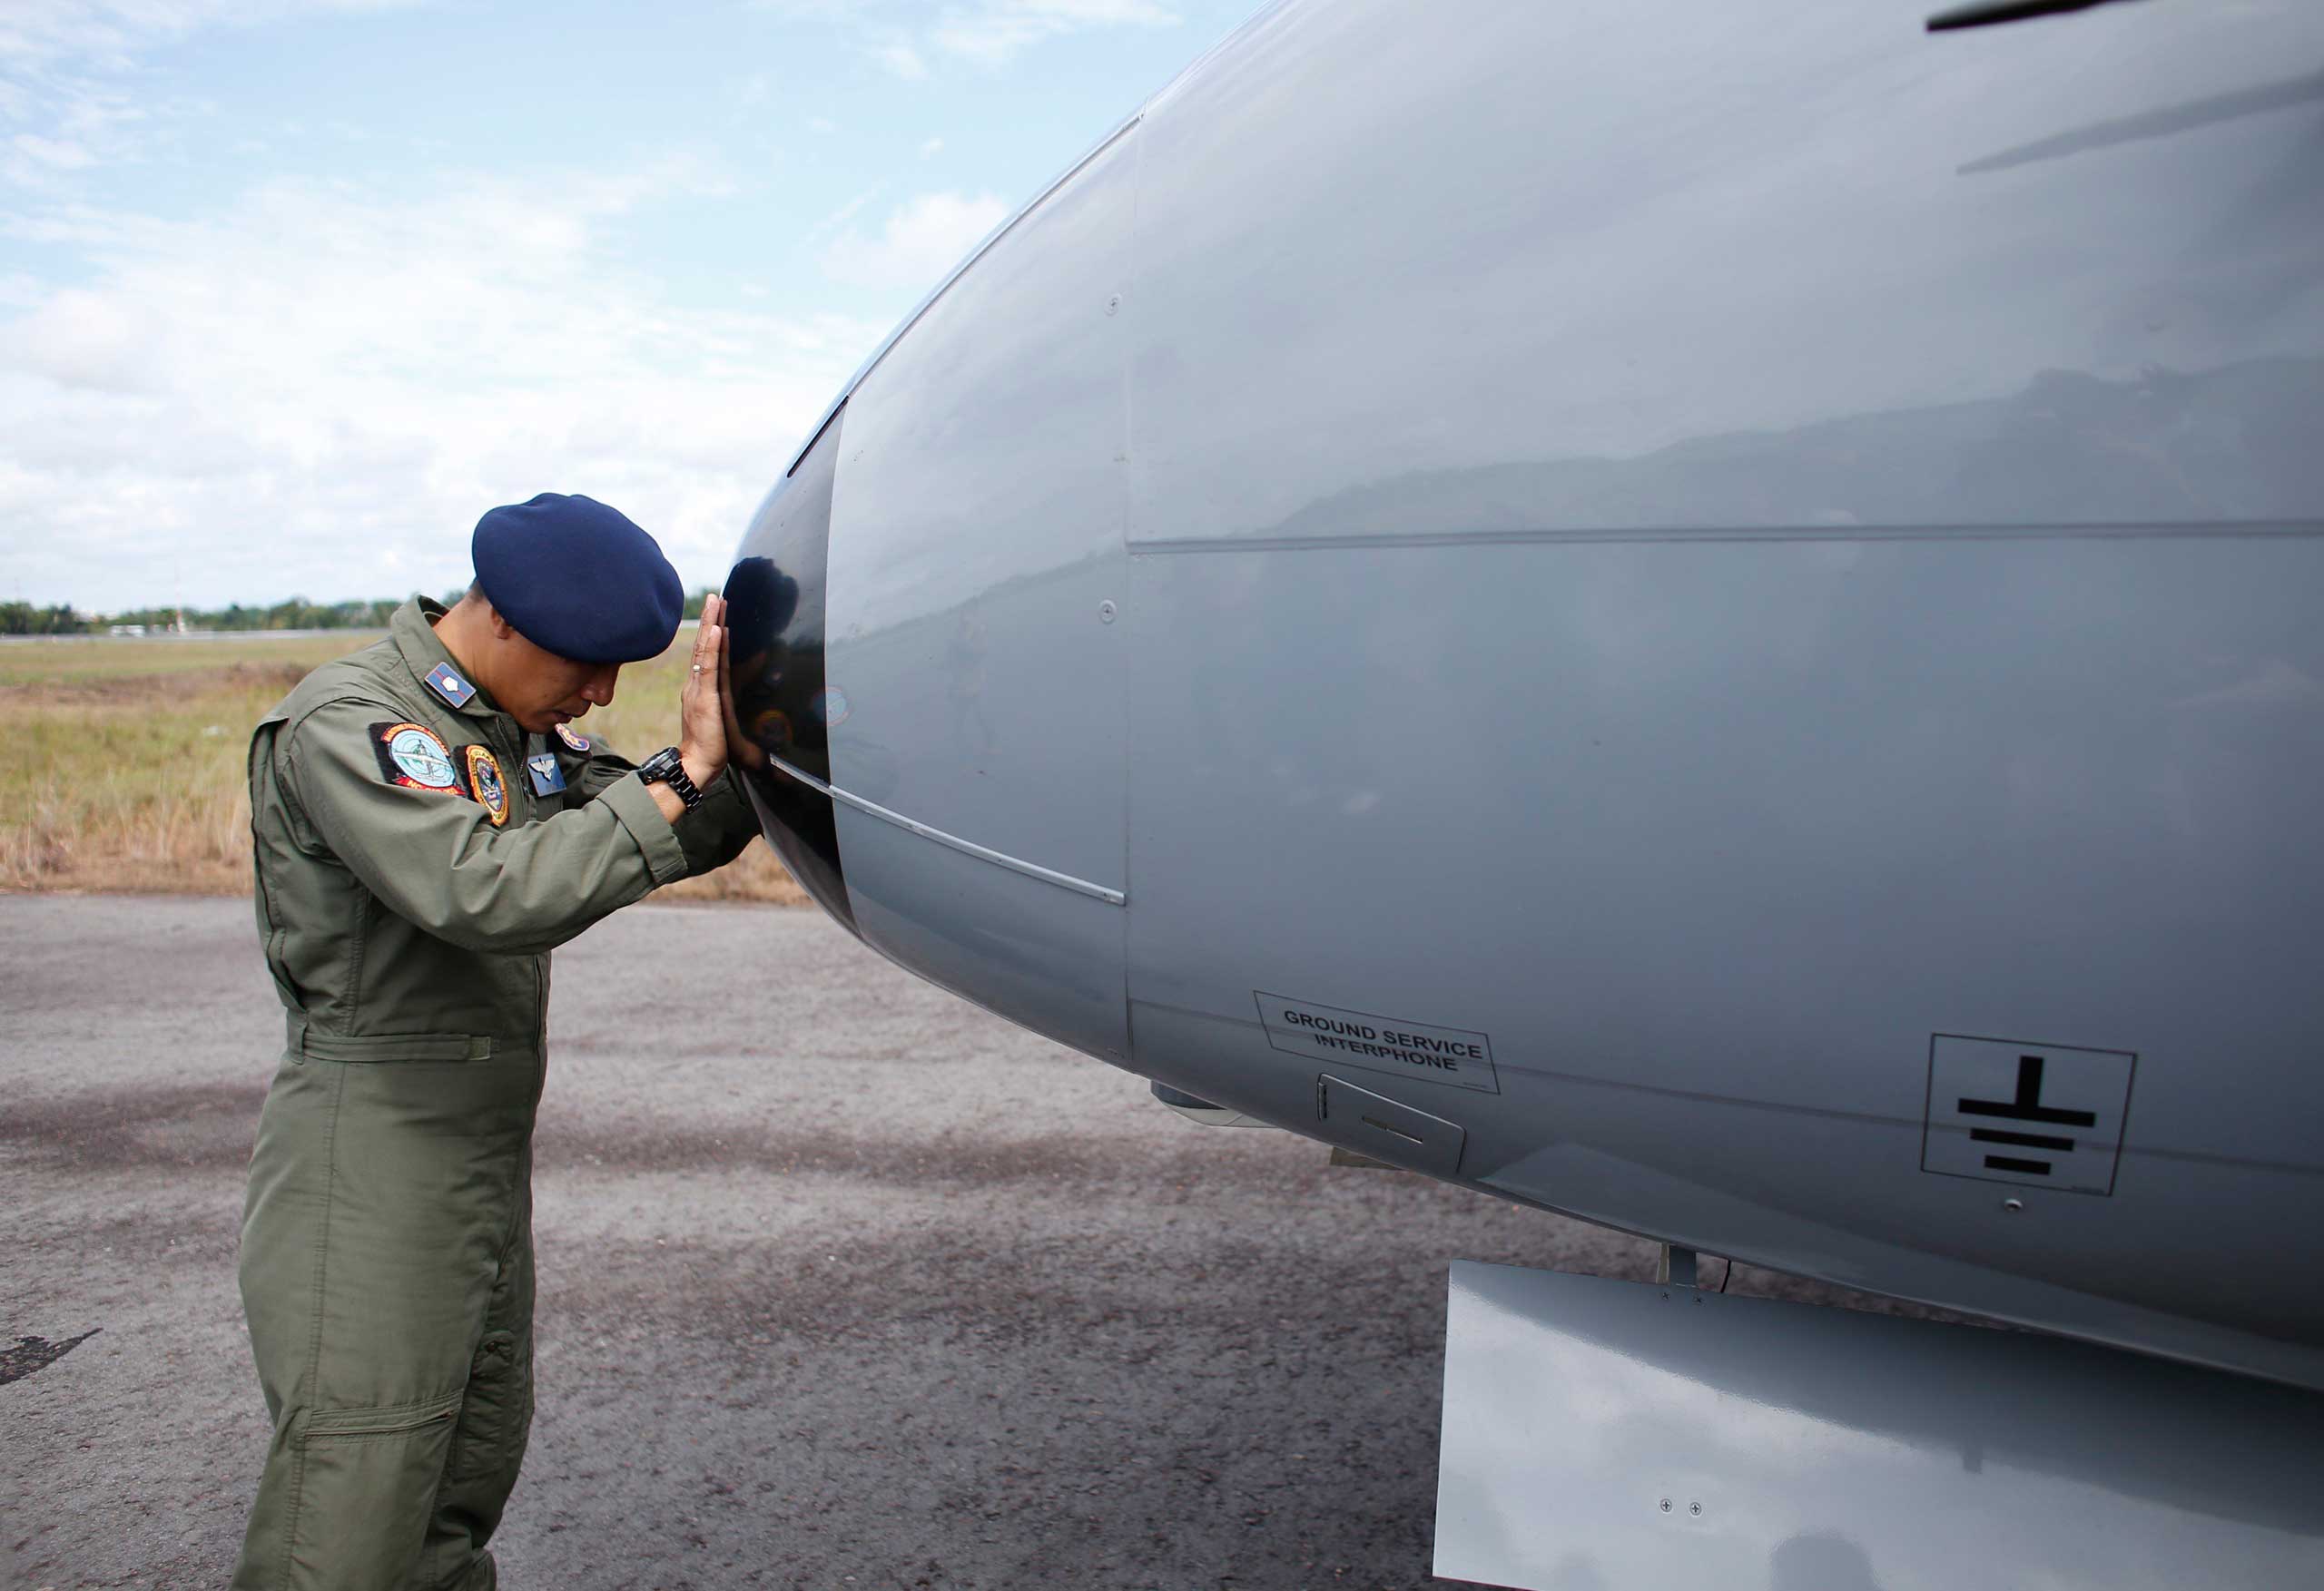 A crew member of an Indonesian Maritime Surveillance plane says a prayer before a search mission to look for AirAsia's Flight QZ8501 in Pangkal Pinang, Bangka Island, Indonesia on Dec. 30, 2014.